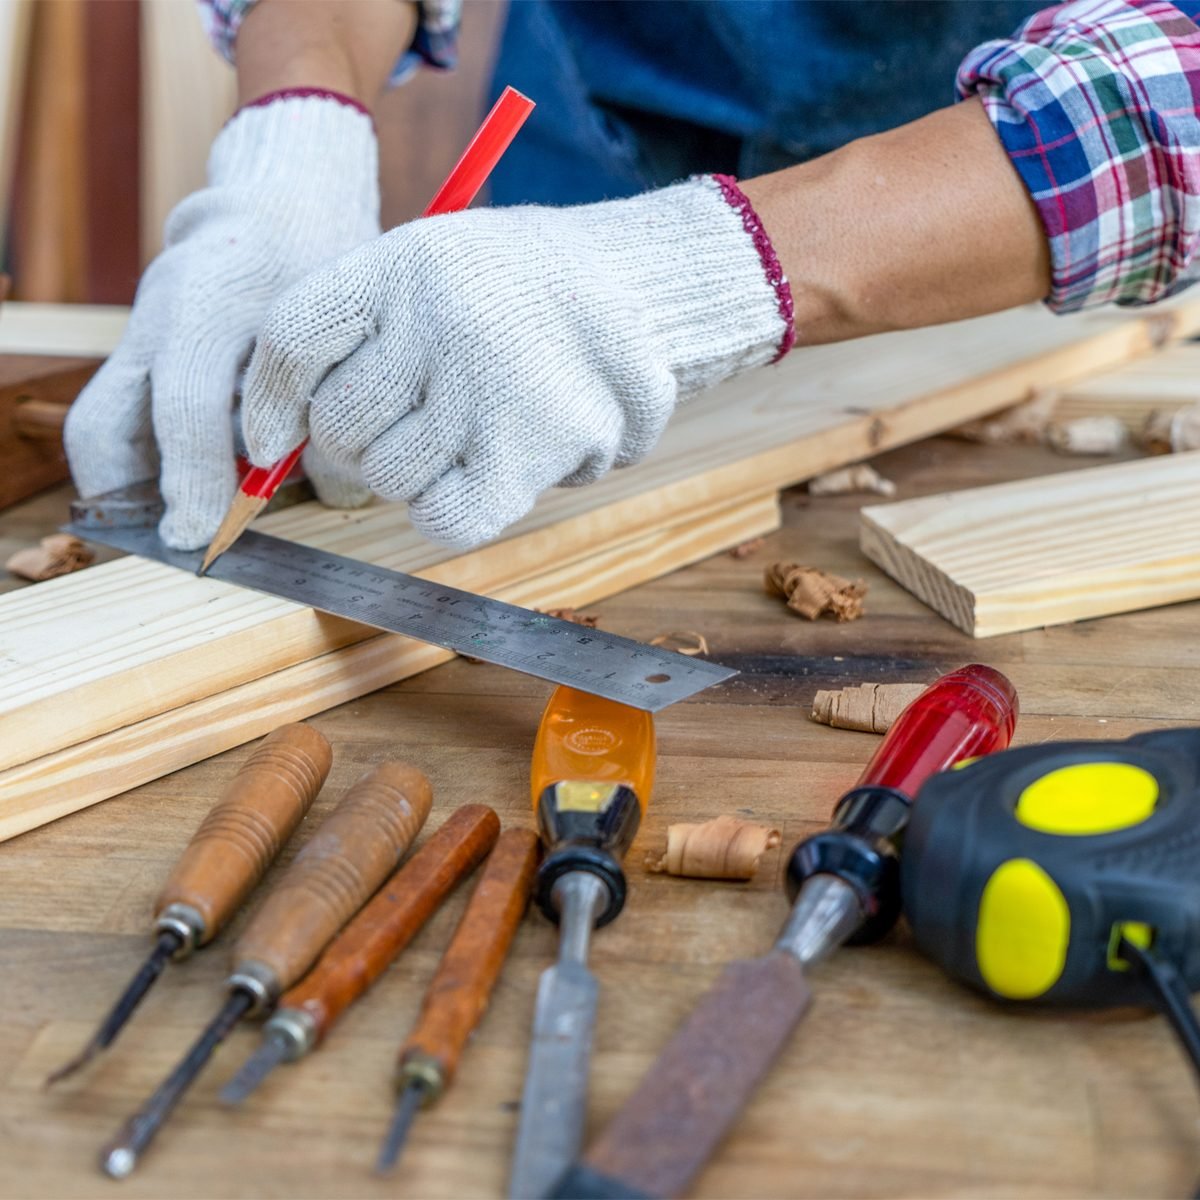 https://www.familyhandyman.com/wp-content/uploads/2022/10/GettyImages-1327237006-Carpenter-working-hammer-meter-and-screw-driver-on-construction-background-by-boonchai-wedmakawand.jpg